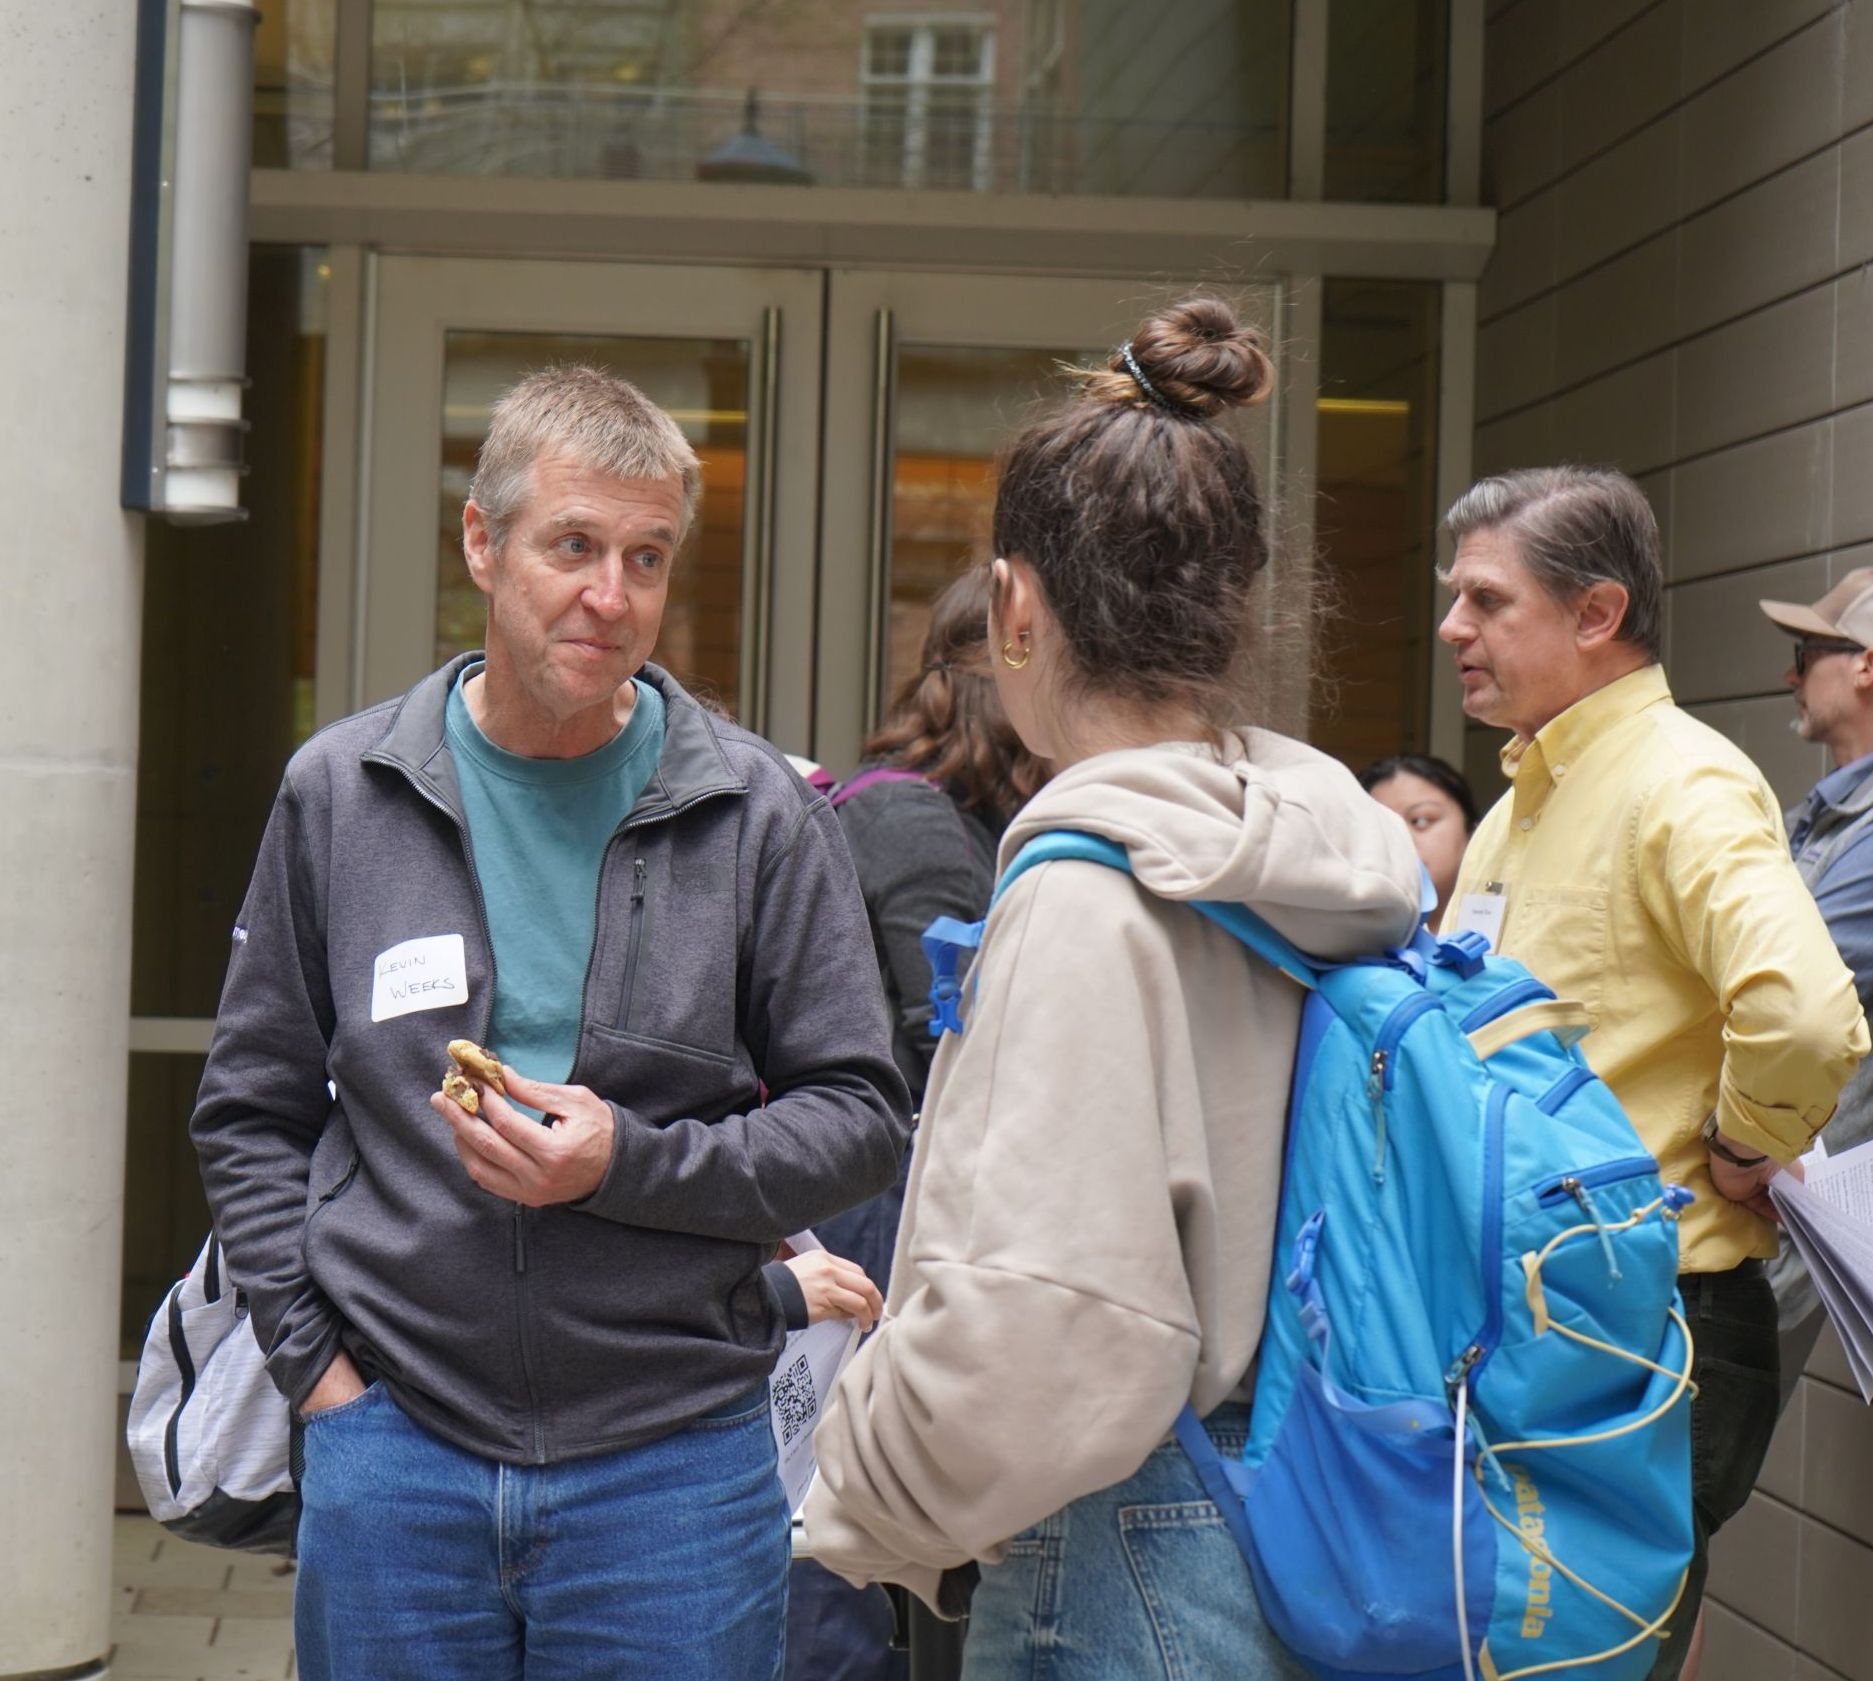 Professor Weeks smiles at a student while they talk about research. He is holding two cookies in his hand. Professor Tiani and Professor Hogan can be seen talking to students in the background.